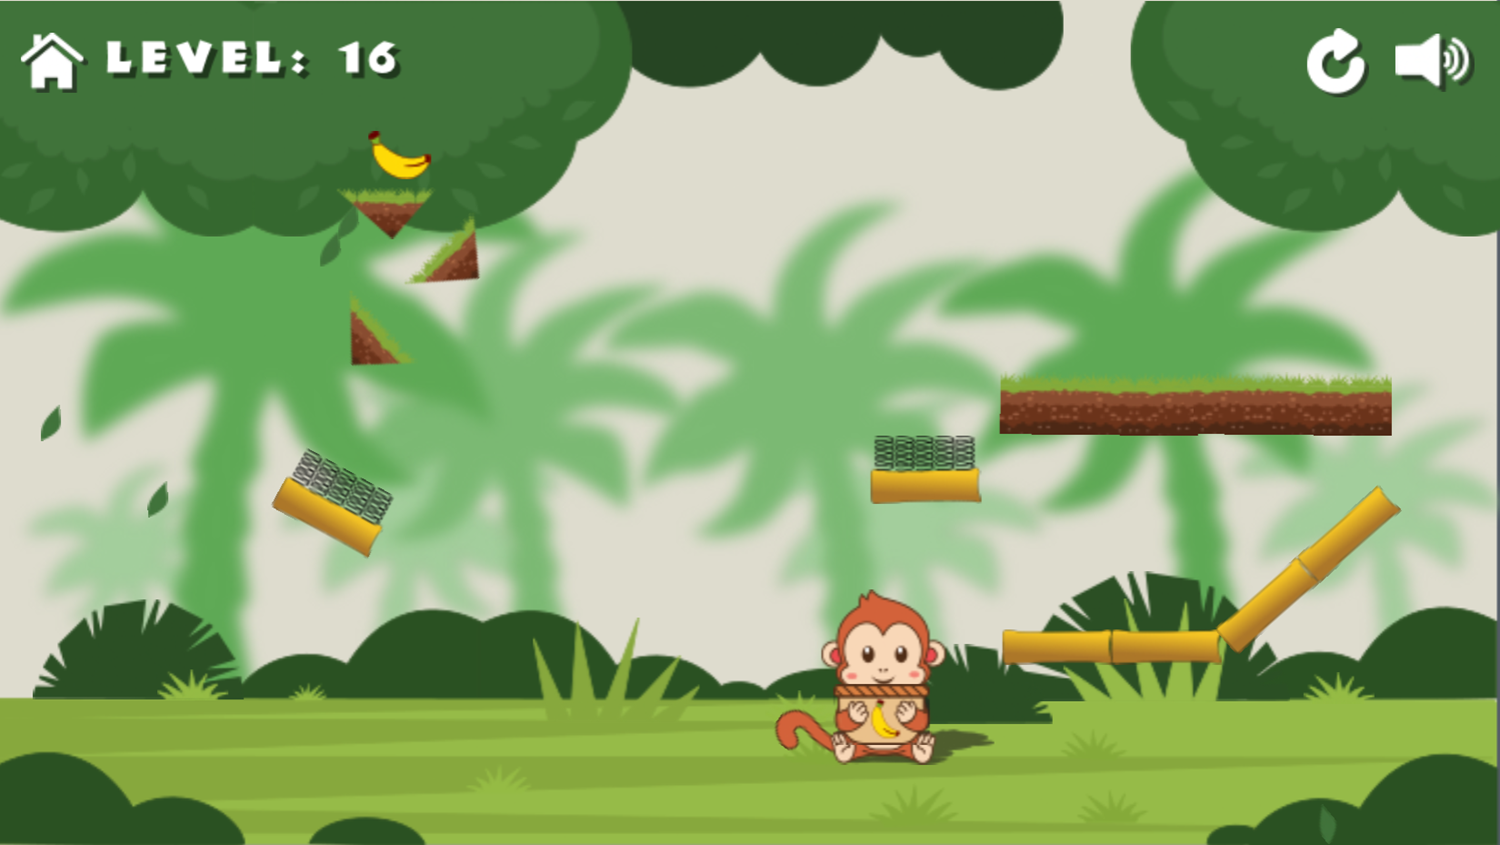 Monkeys and Fruits Game Level With Angled Blocks Screenshot.